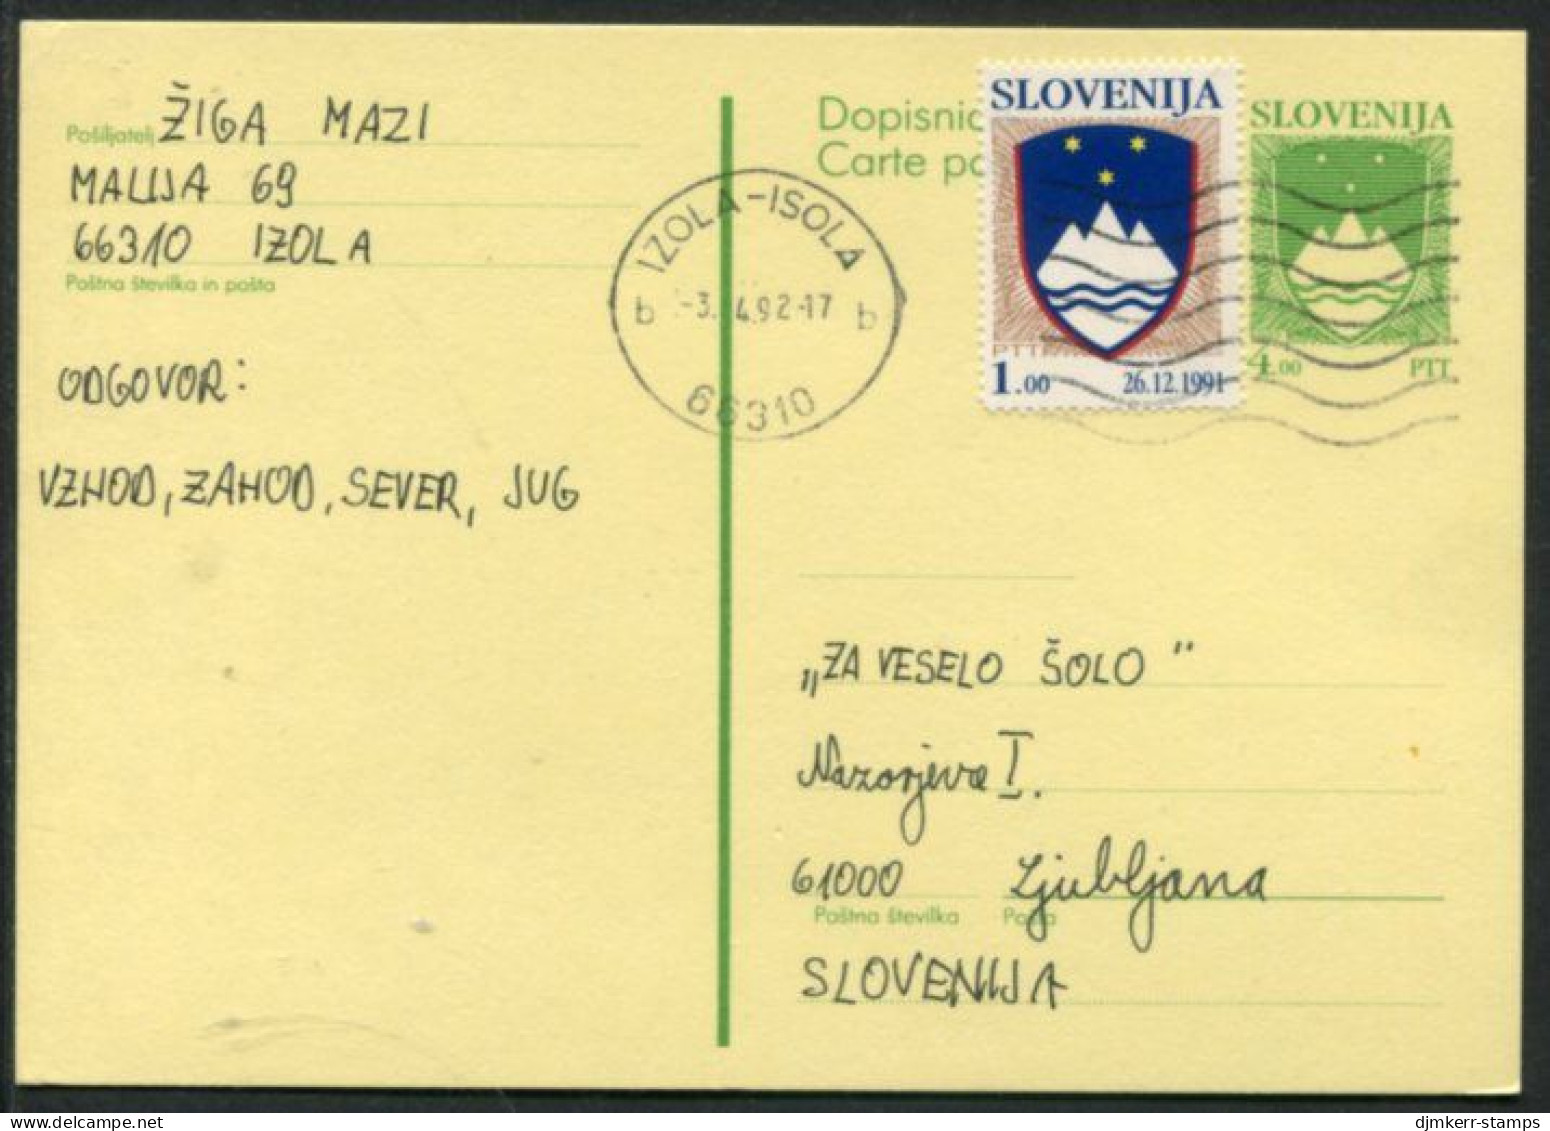 SLOVENIA 1992 4.00 T.  Arms  Stationery Card, Used With Additional 1 T. Stamp.  Michel P1 - Slovénie